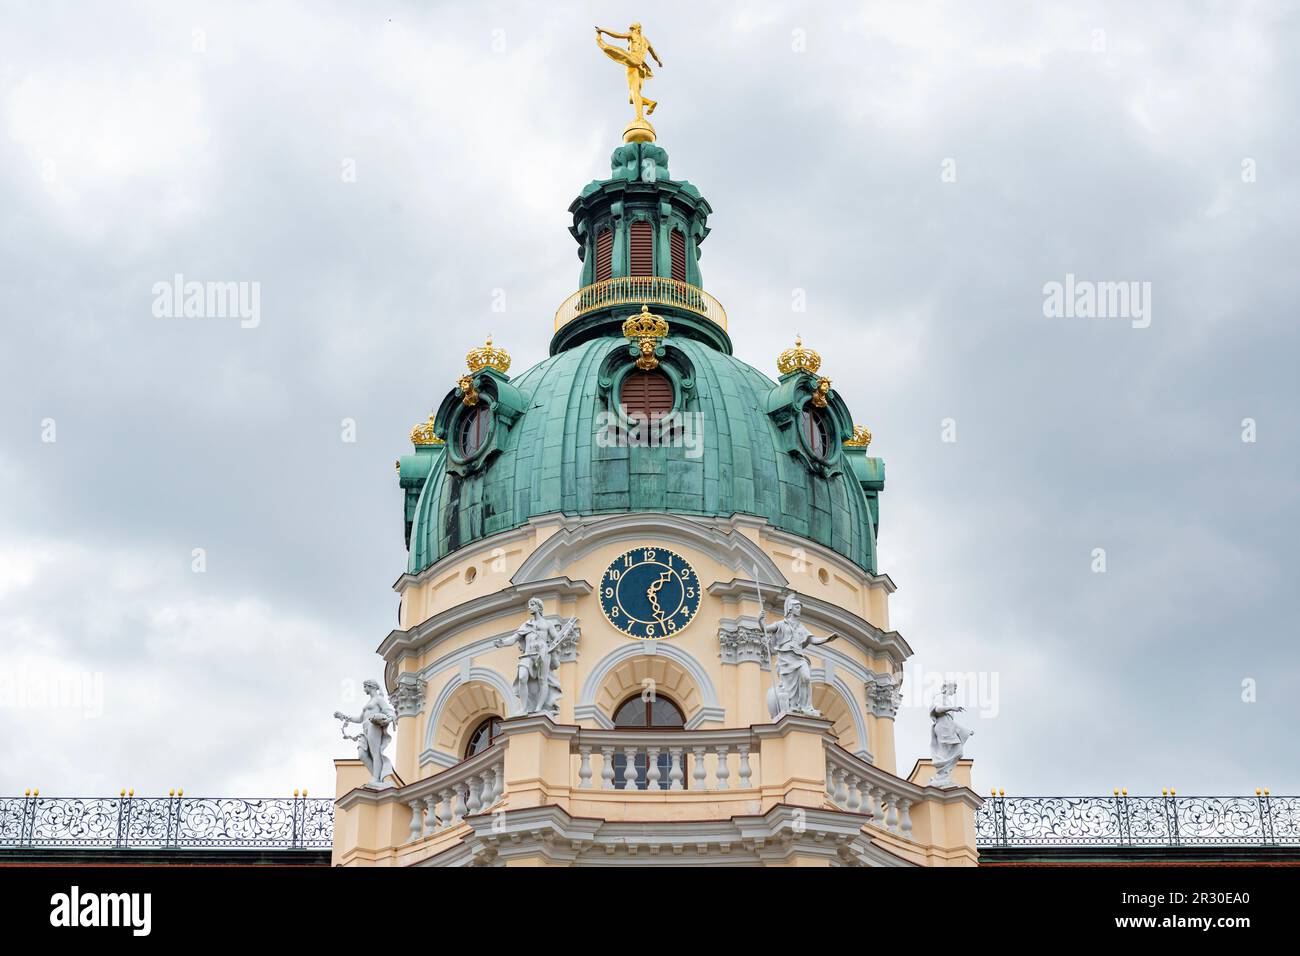 Berlin, Germany. Facde & Esterior of the Royal Palace Charlottenburg, former seat and residence of the Kings of Pruissen. Stock Photo